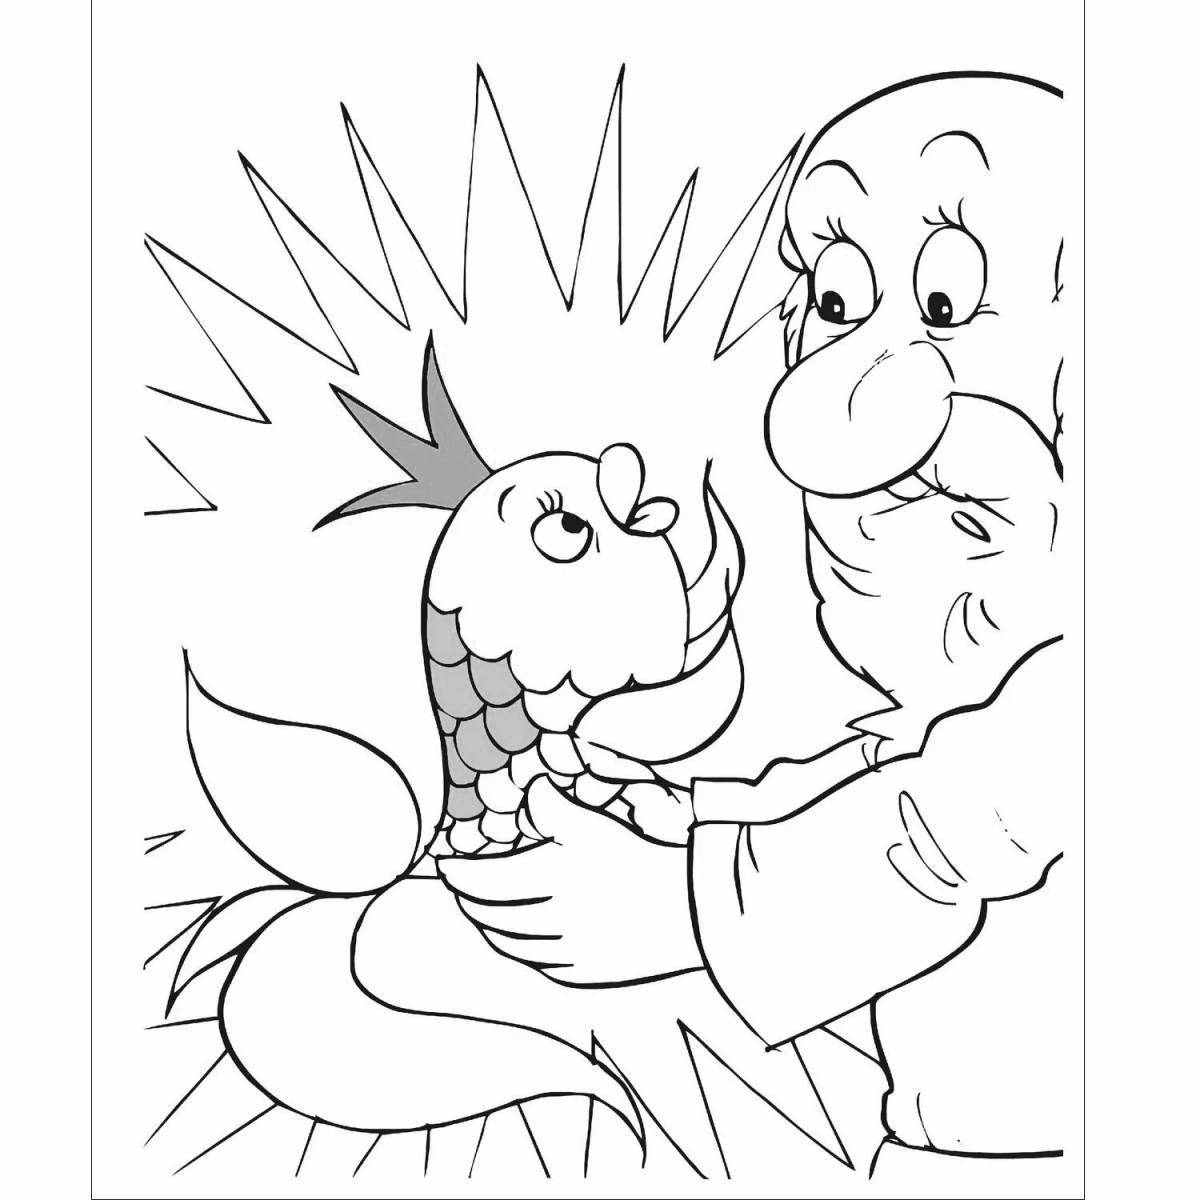 Funny coloring book based on fairy tales